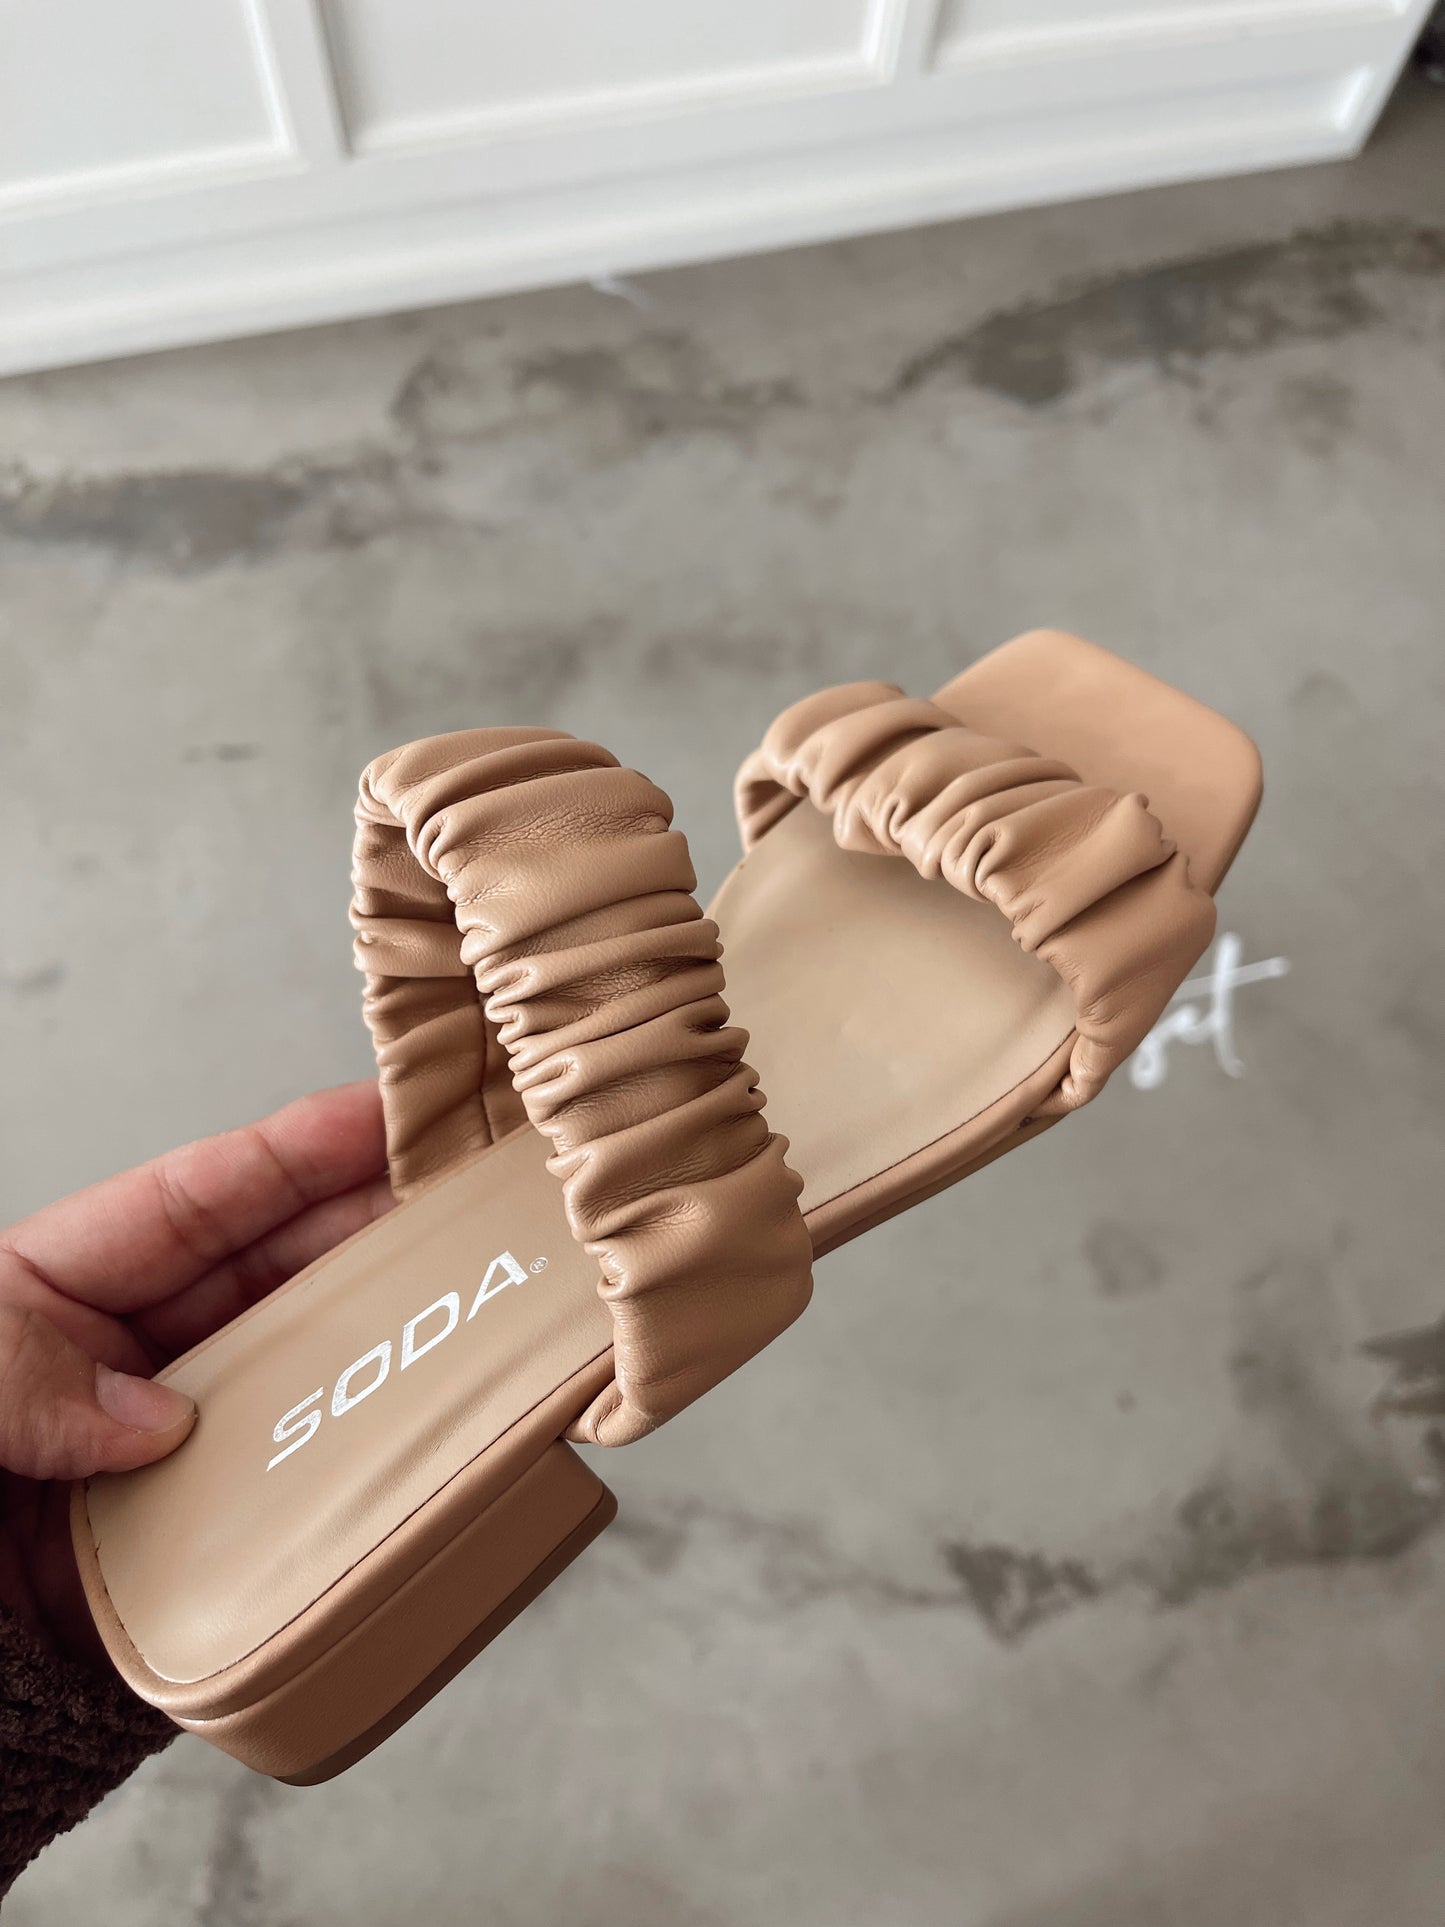 Misguided Strappy Sandal - Nude